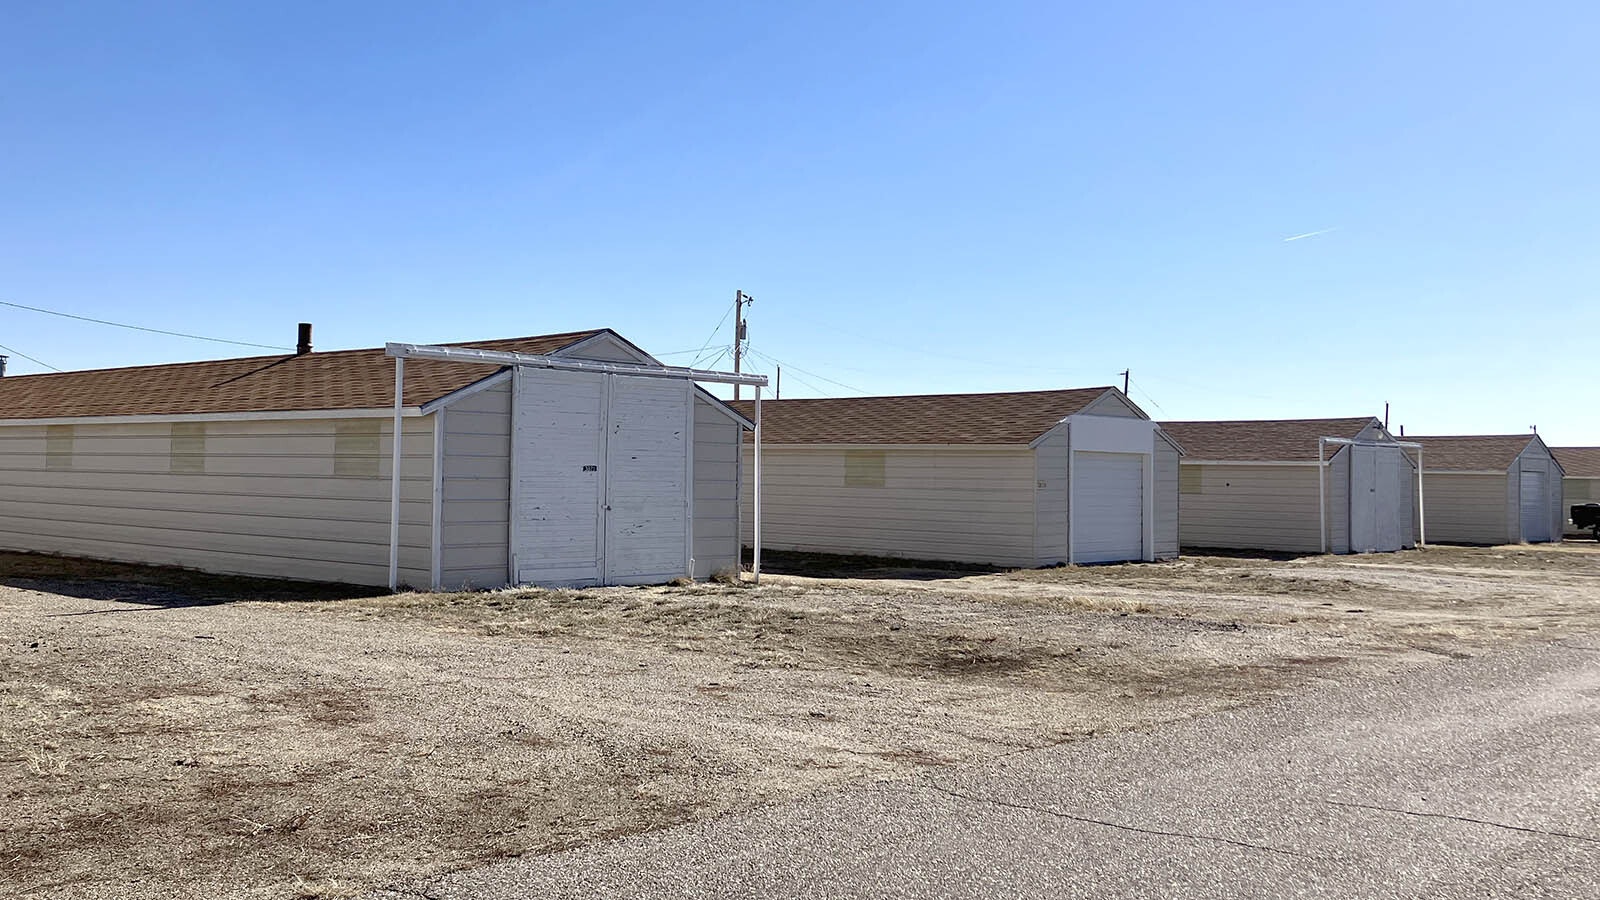 Former Casper Army Air Base barracks can still be seen at the Casper/Natrona County International Airport where Casper Army Air Base existed in World War II. The barracks did not keep out the Wyoming weather according to historical accounts.